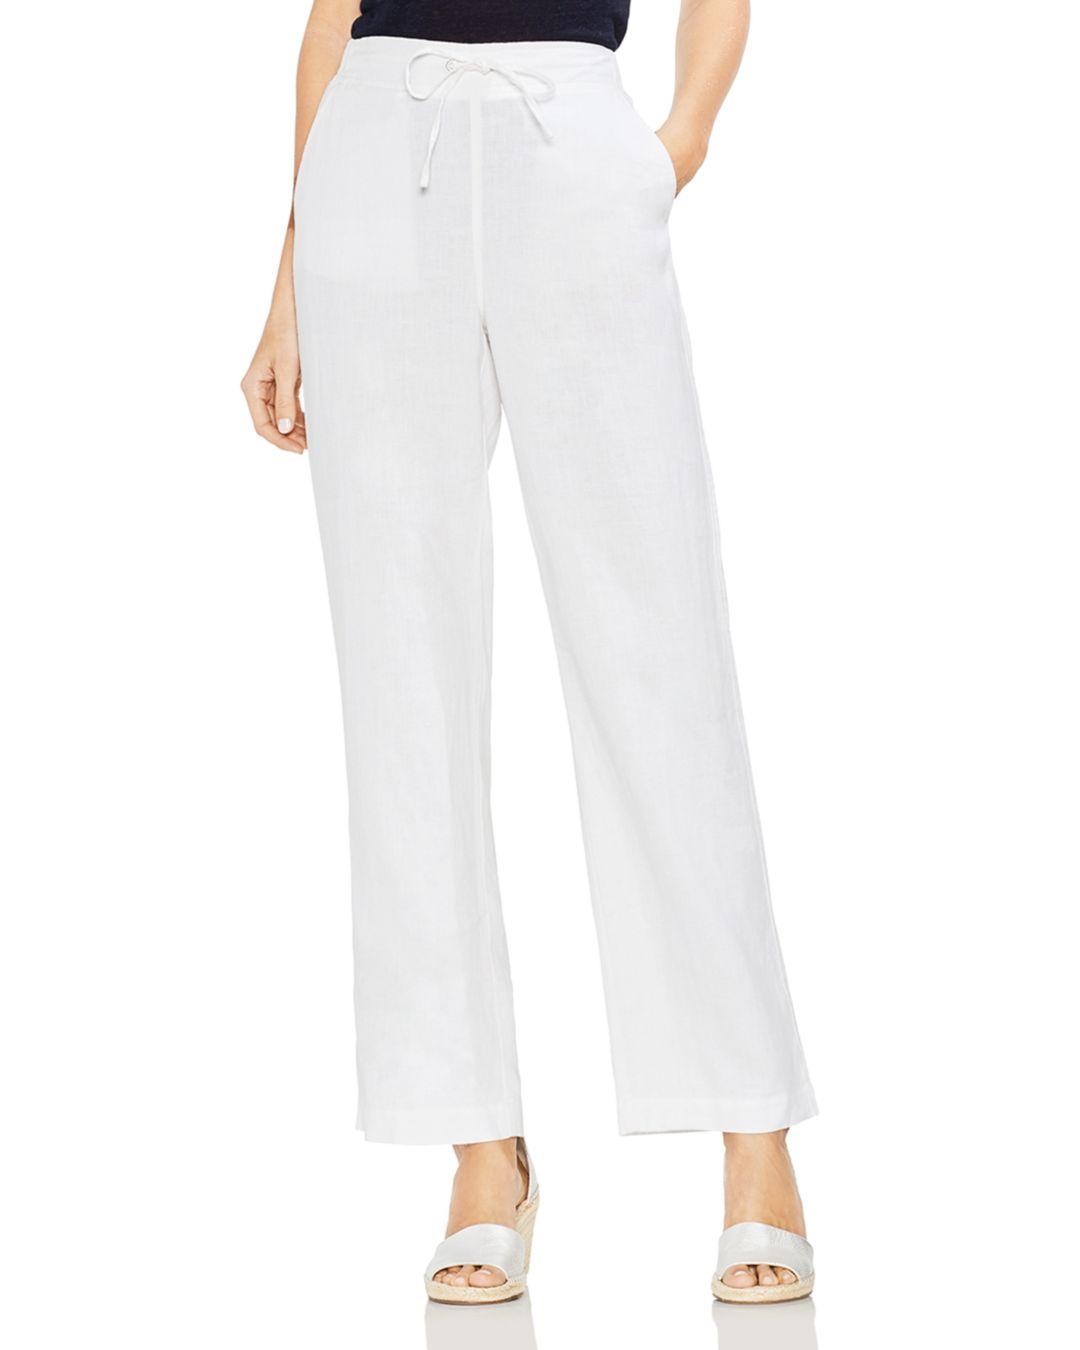 Vince Camuto Linen Drawstring Wide-leg Pants in Ultra White (White) - Lyst